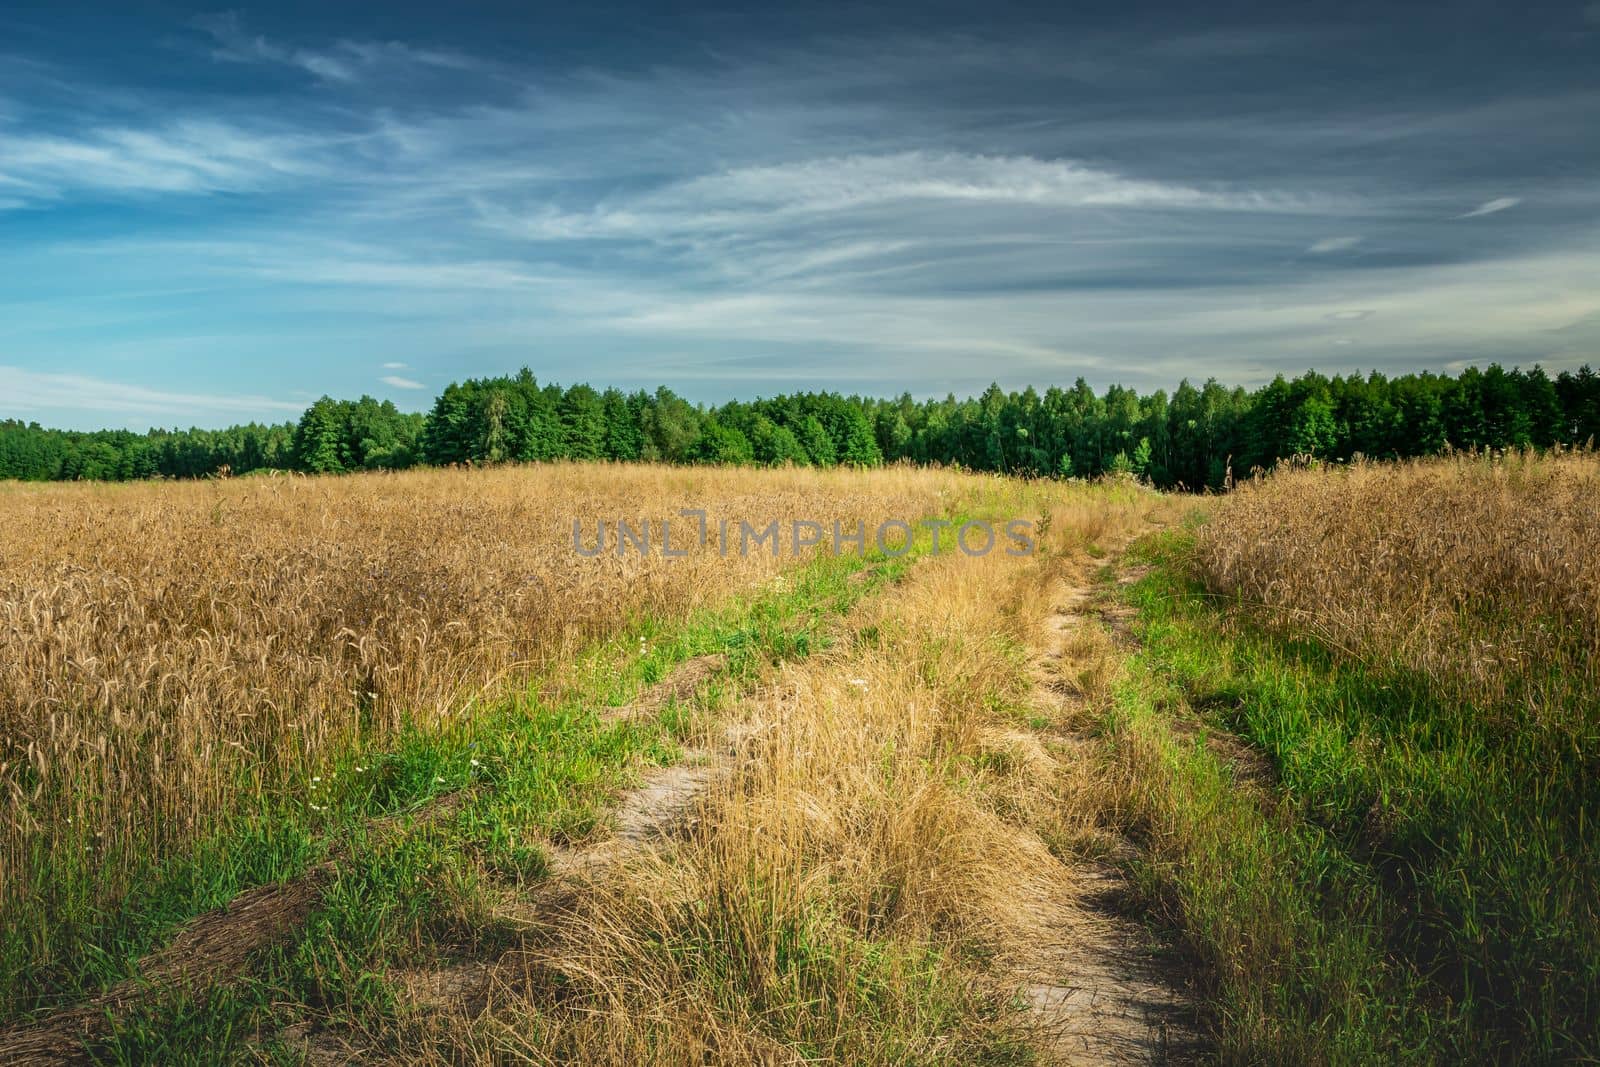 Rural road next to a field with grain, eastern Poland by darekb22